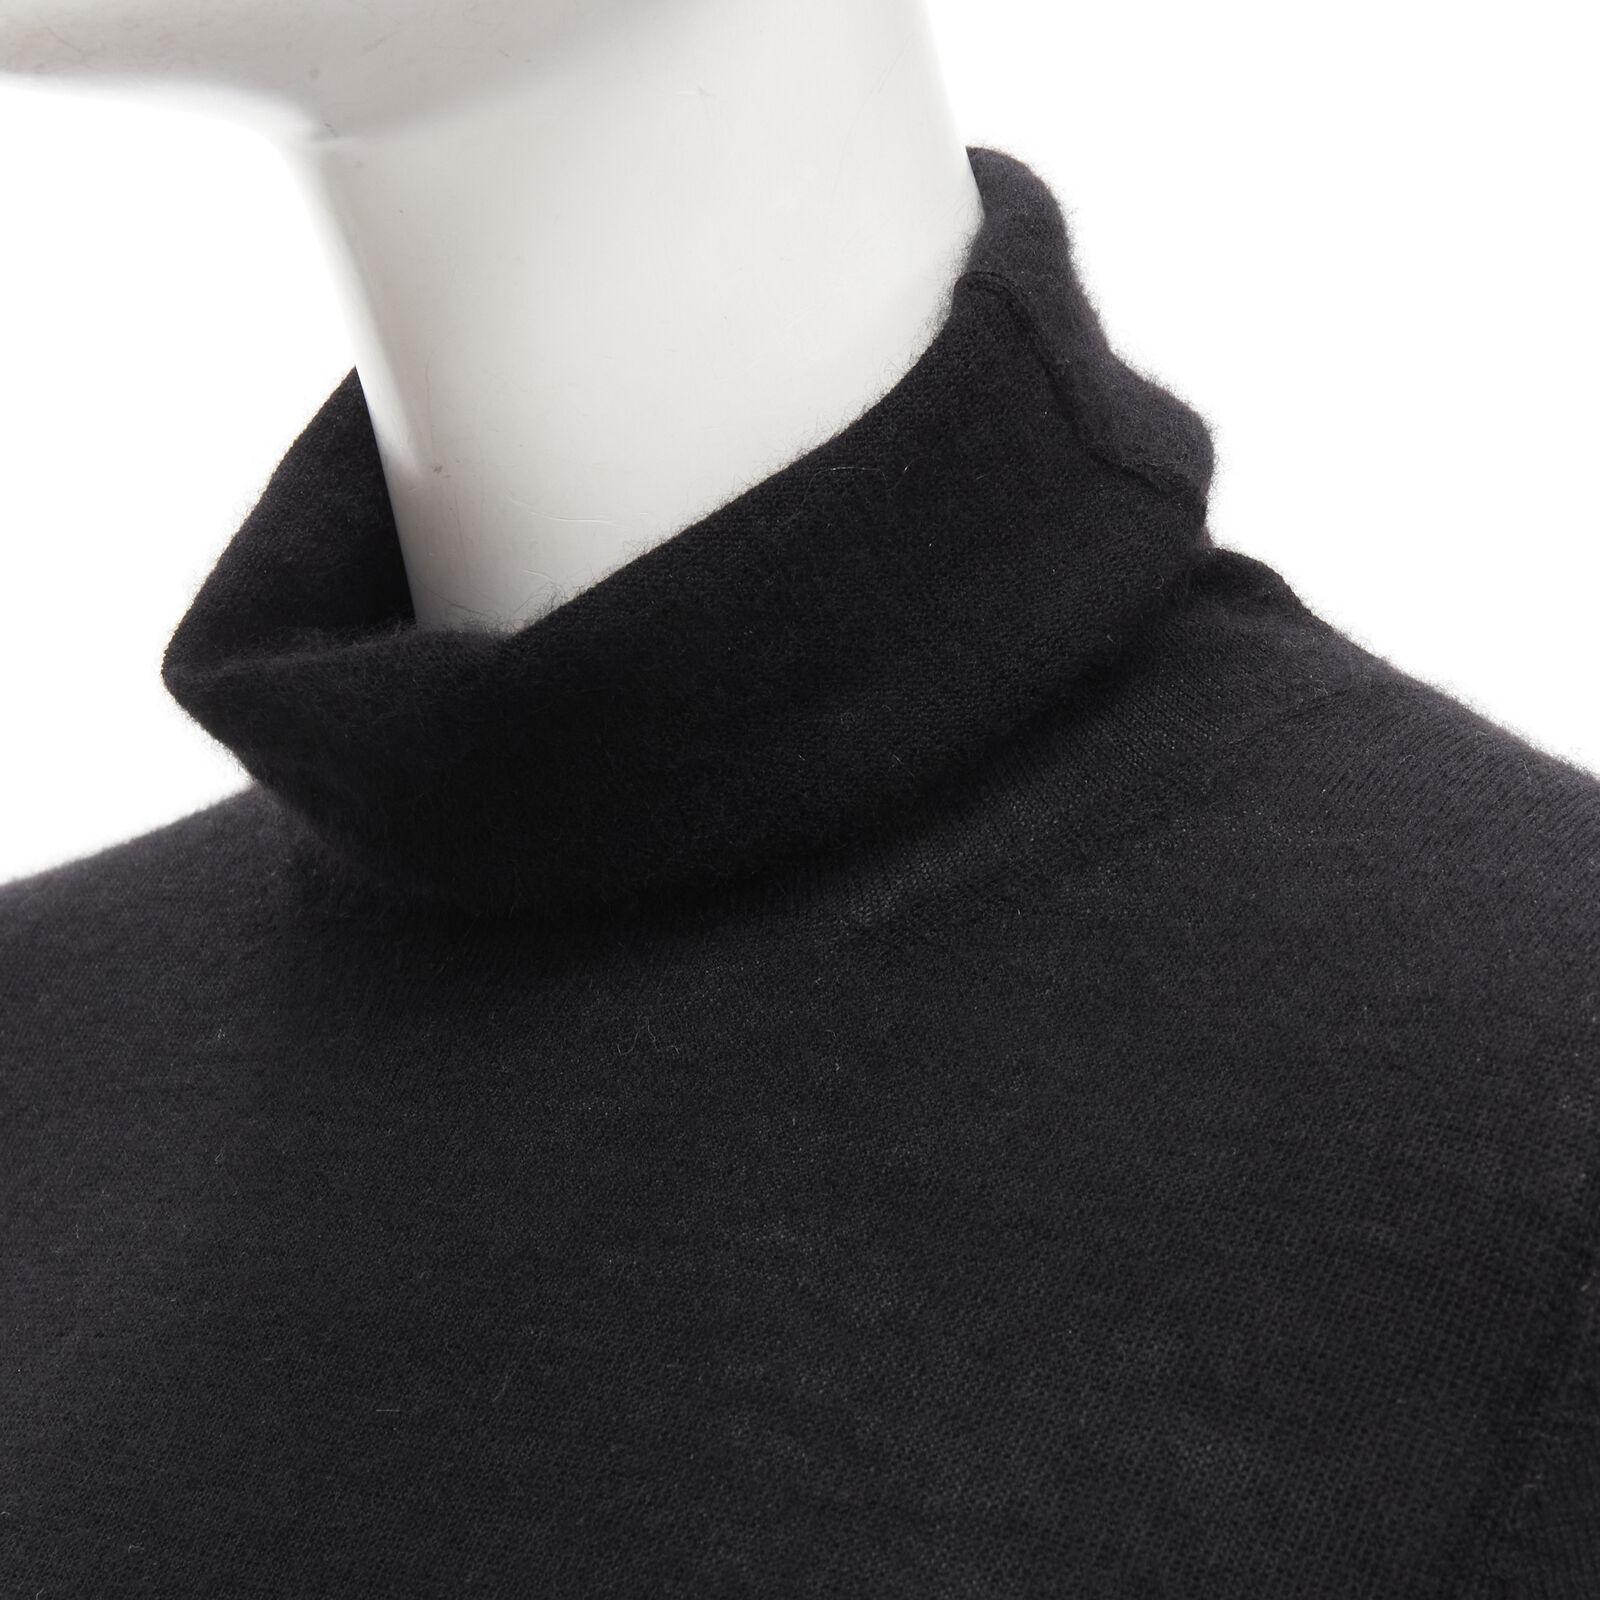 CLUB MONACO 100% Italian cashmere black turtleneck long sleeves sweater S
Reference: LNKO/A02068
Brand: Club Monaco
Material: 100% Cashmere
Color: Black
Pattern: Solid
Closure: Pullover
Made in: China

CONDITION:
Condition: Good, this item was